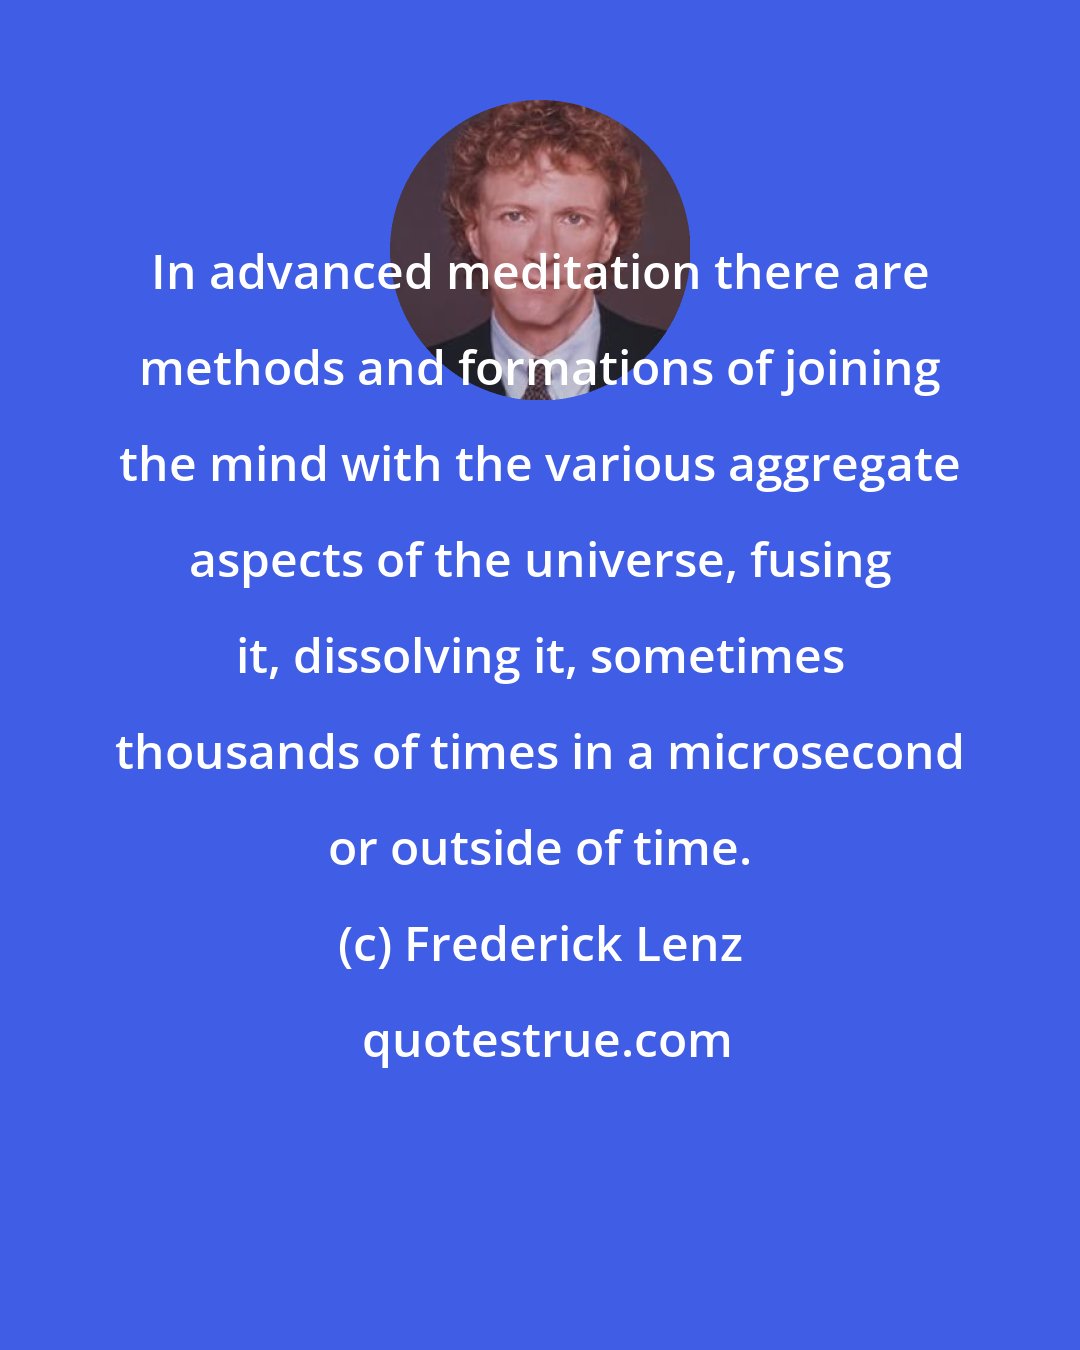 Frederick Lenz: In advanced meditation there are methods and formations of joining the mind with the various aggregate aspects of the universe, fusing it, dissolving it, sometimes thousands of times in a microsecond or outside of time.